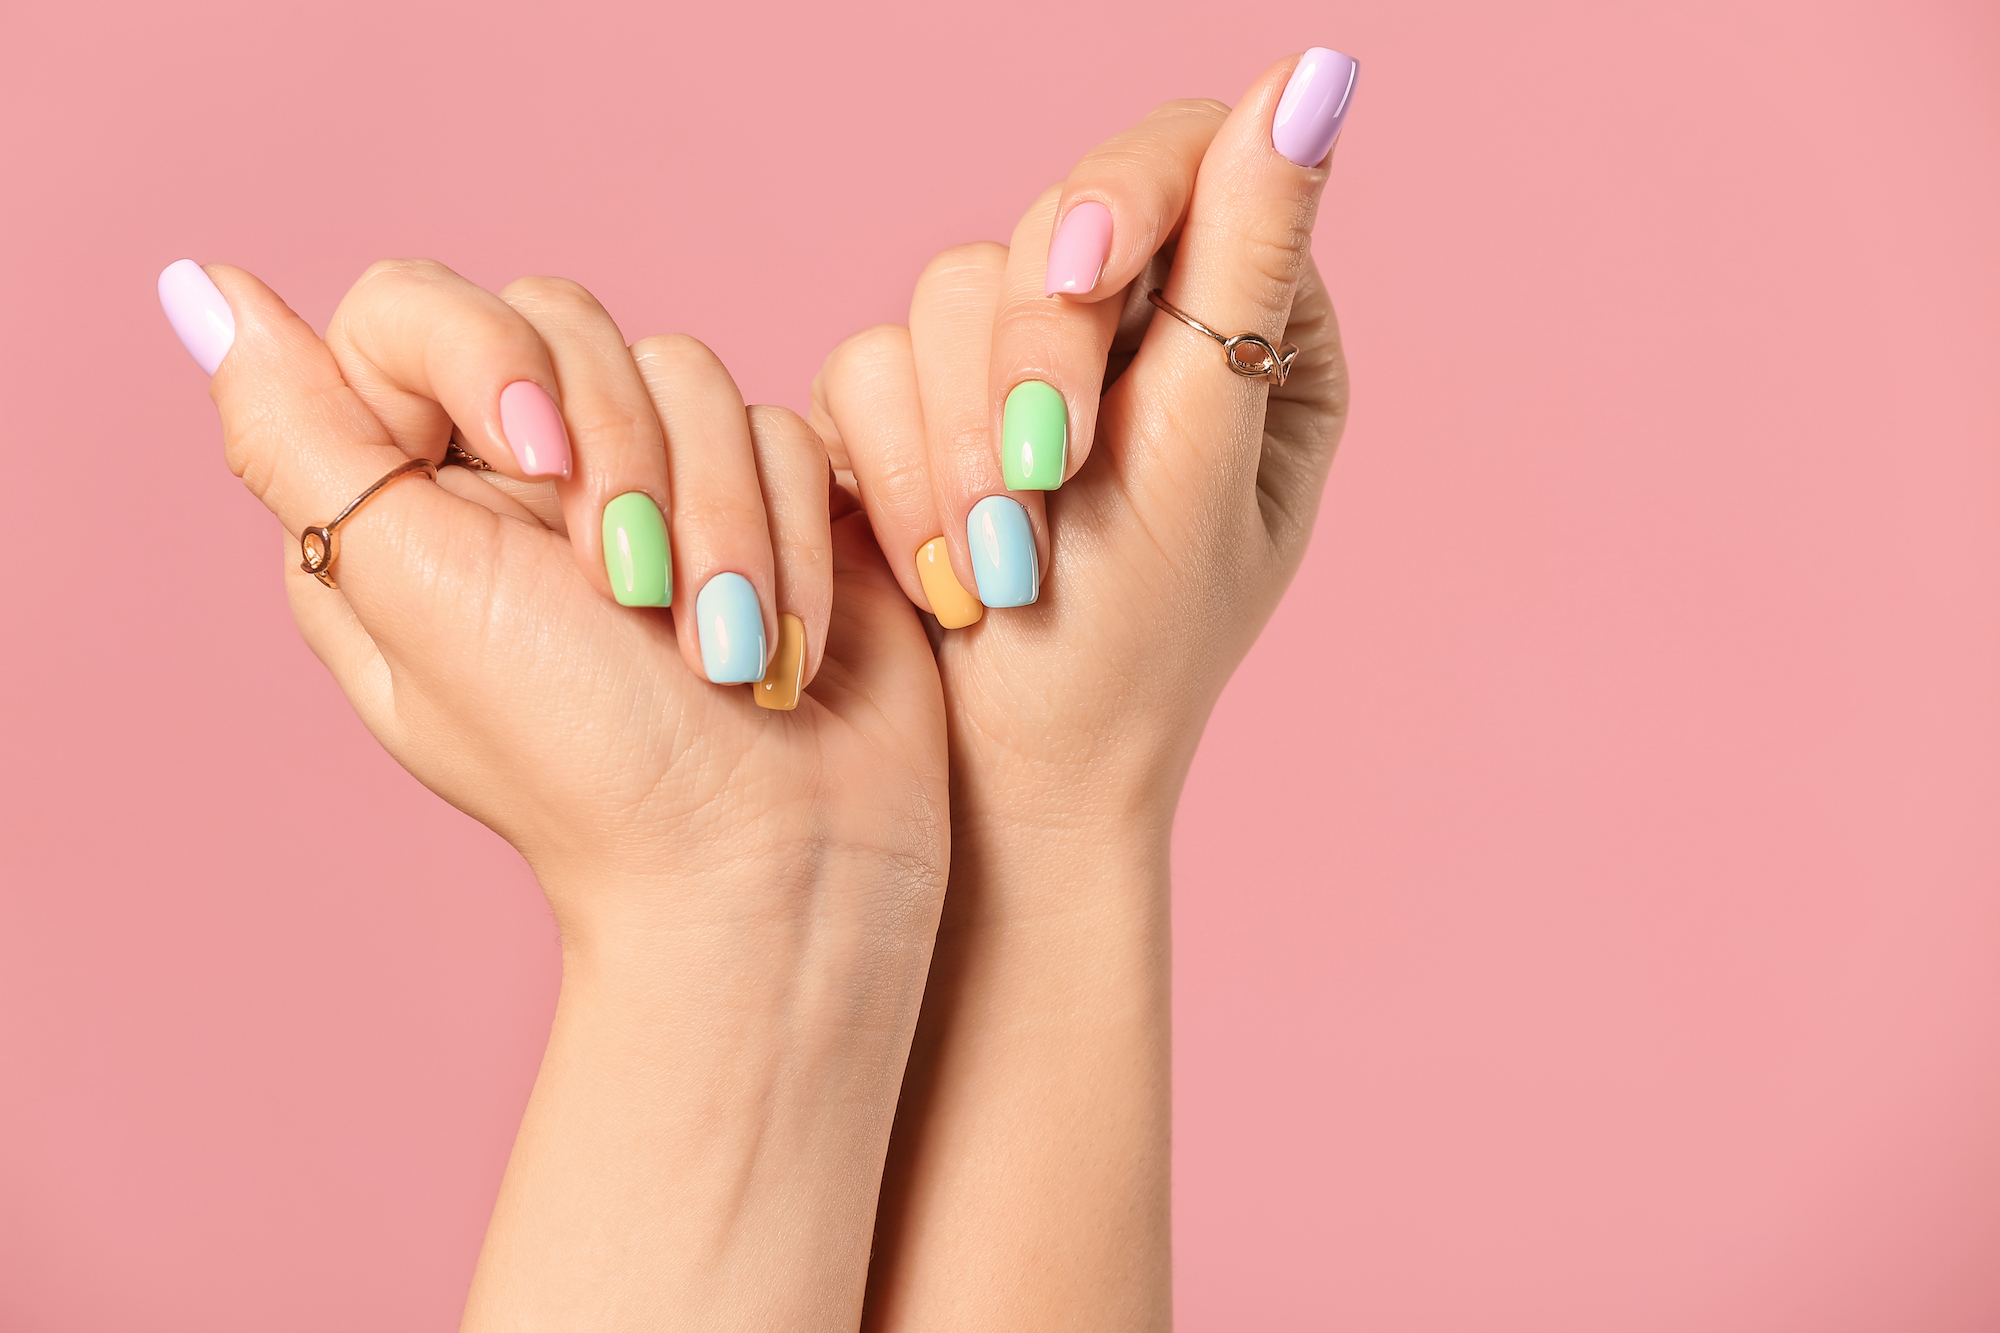 9. Budget-Friendly Nail Art Ideas for At-Home Manicures - wide 7